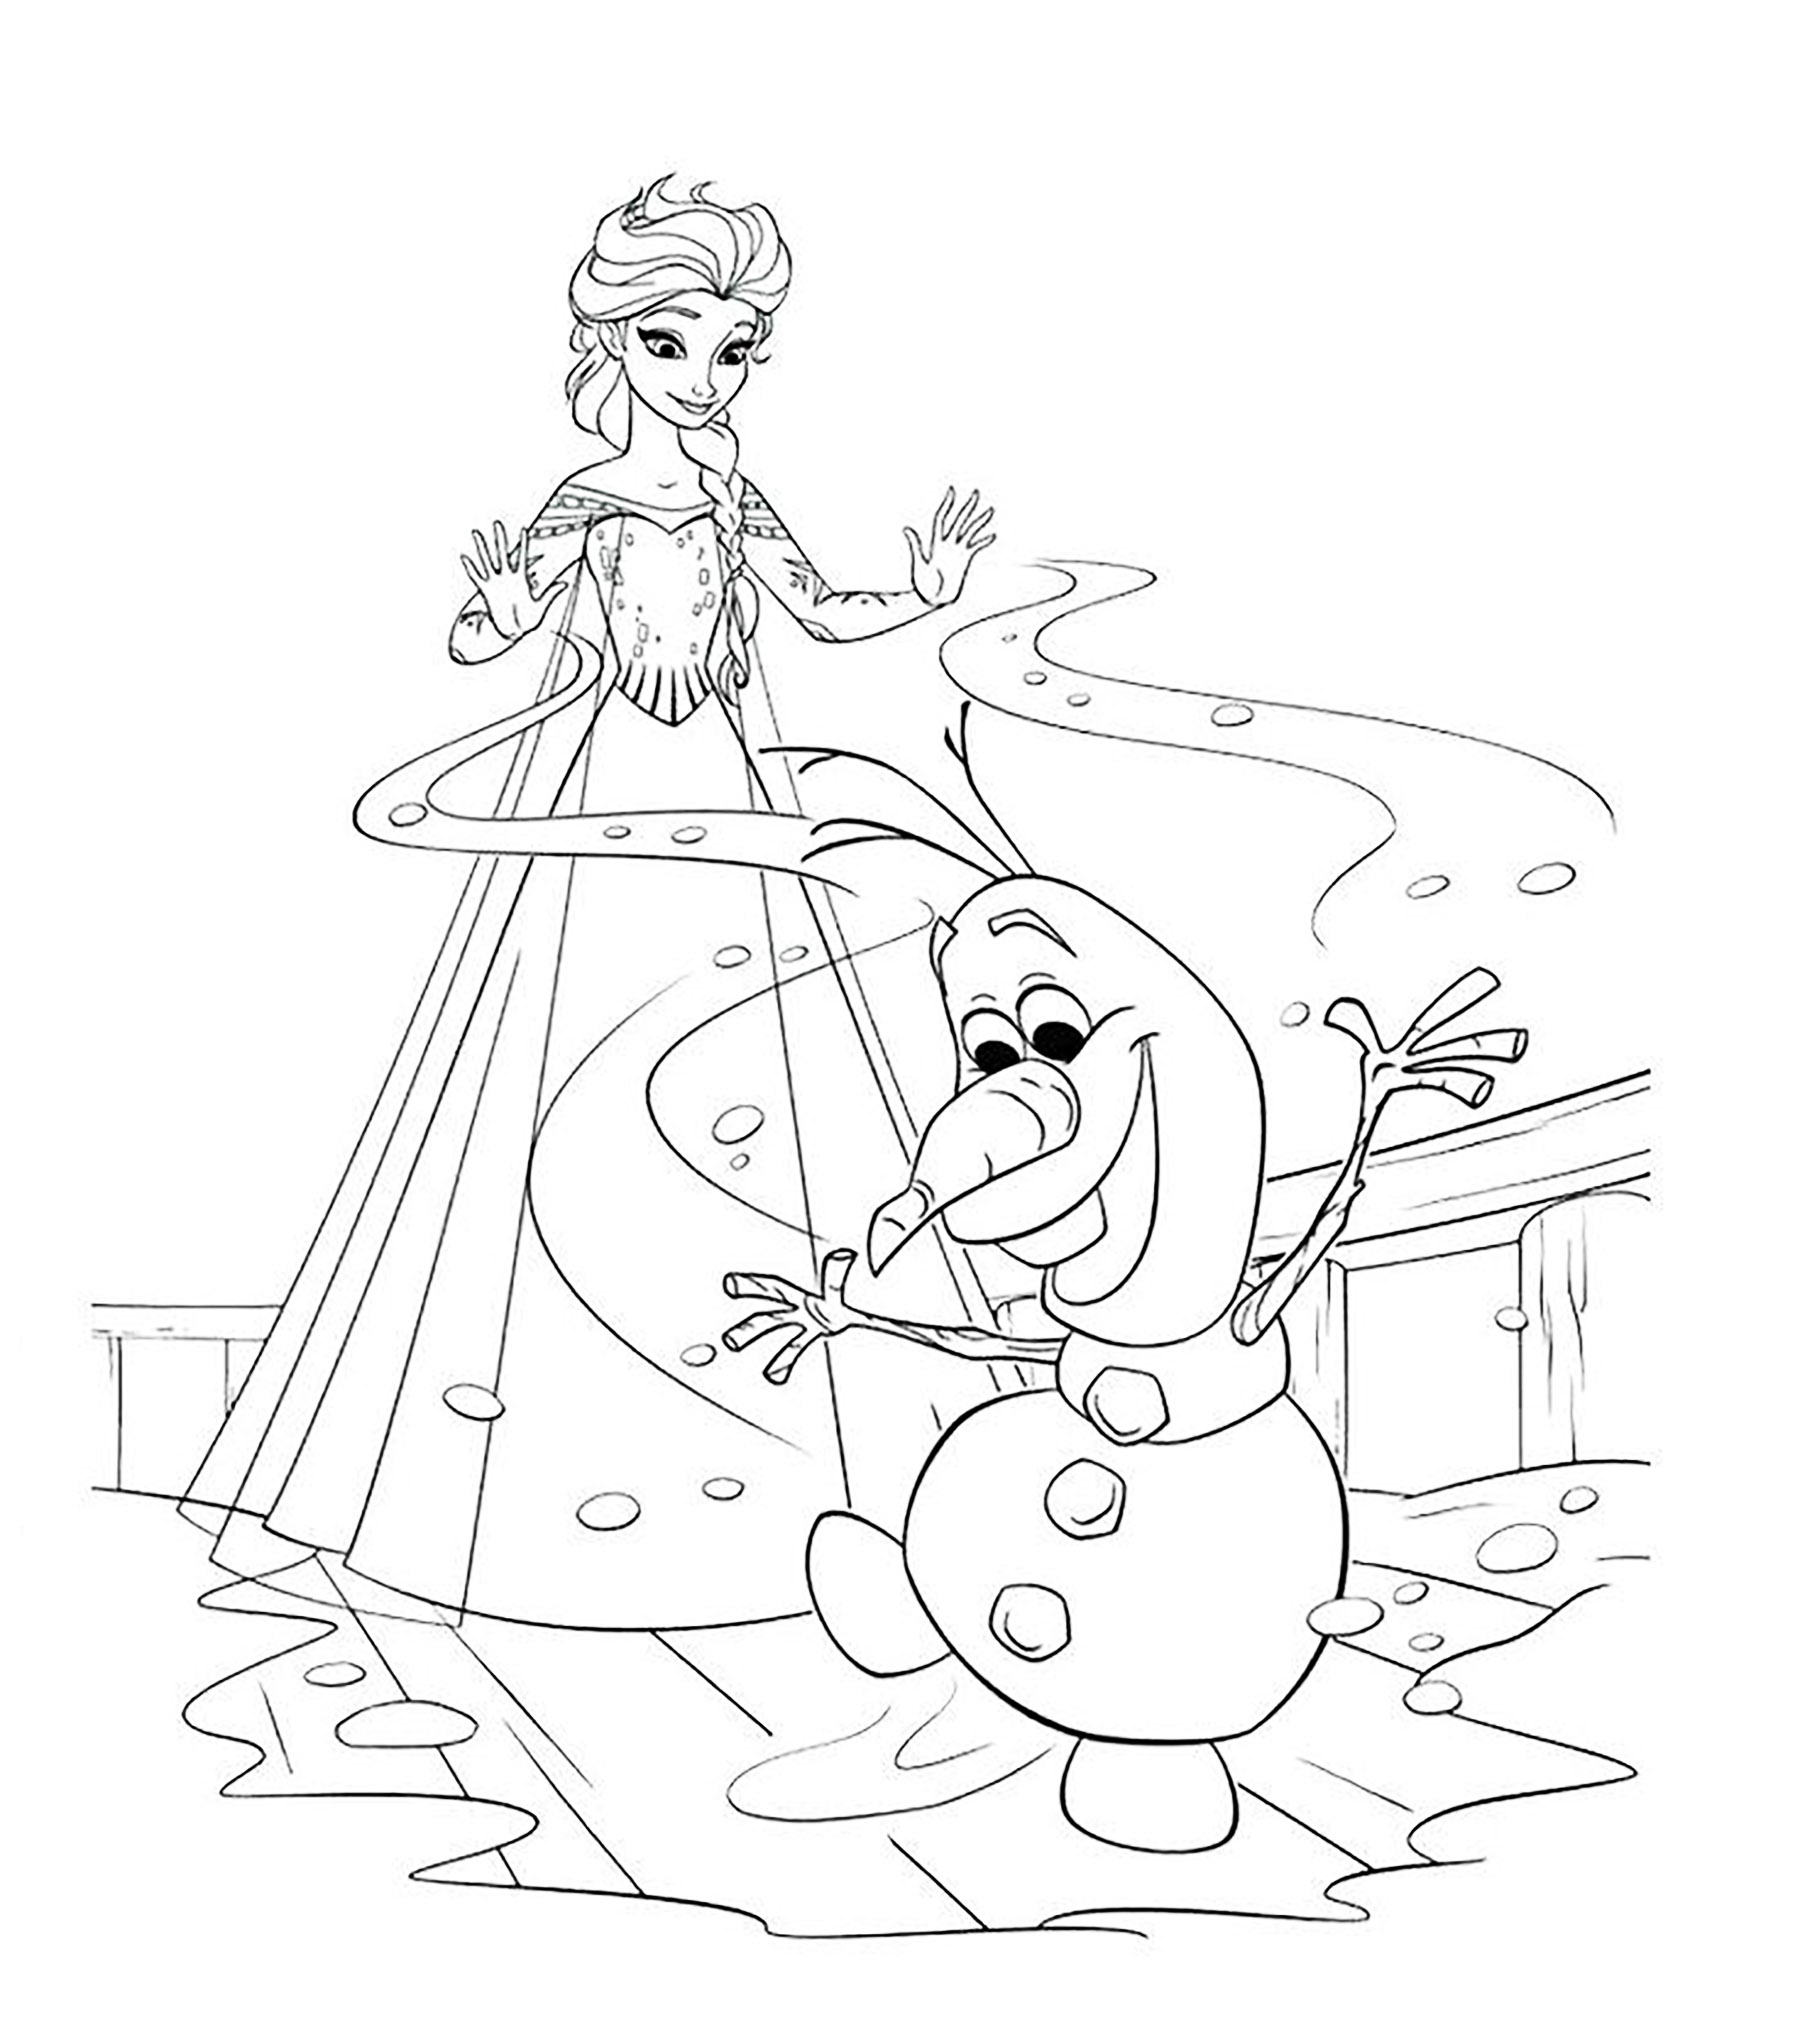 Frozen free to color for children Frozen Kids Coloring Pages